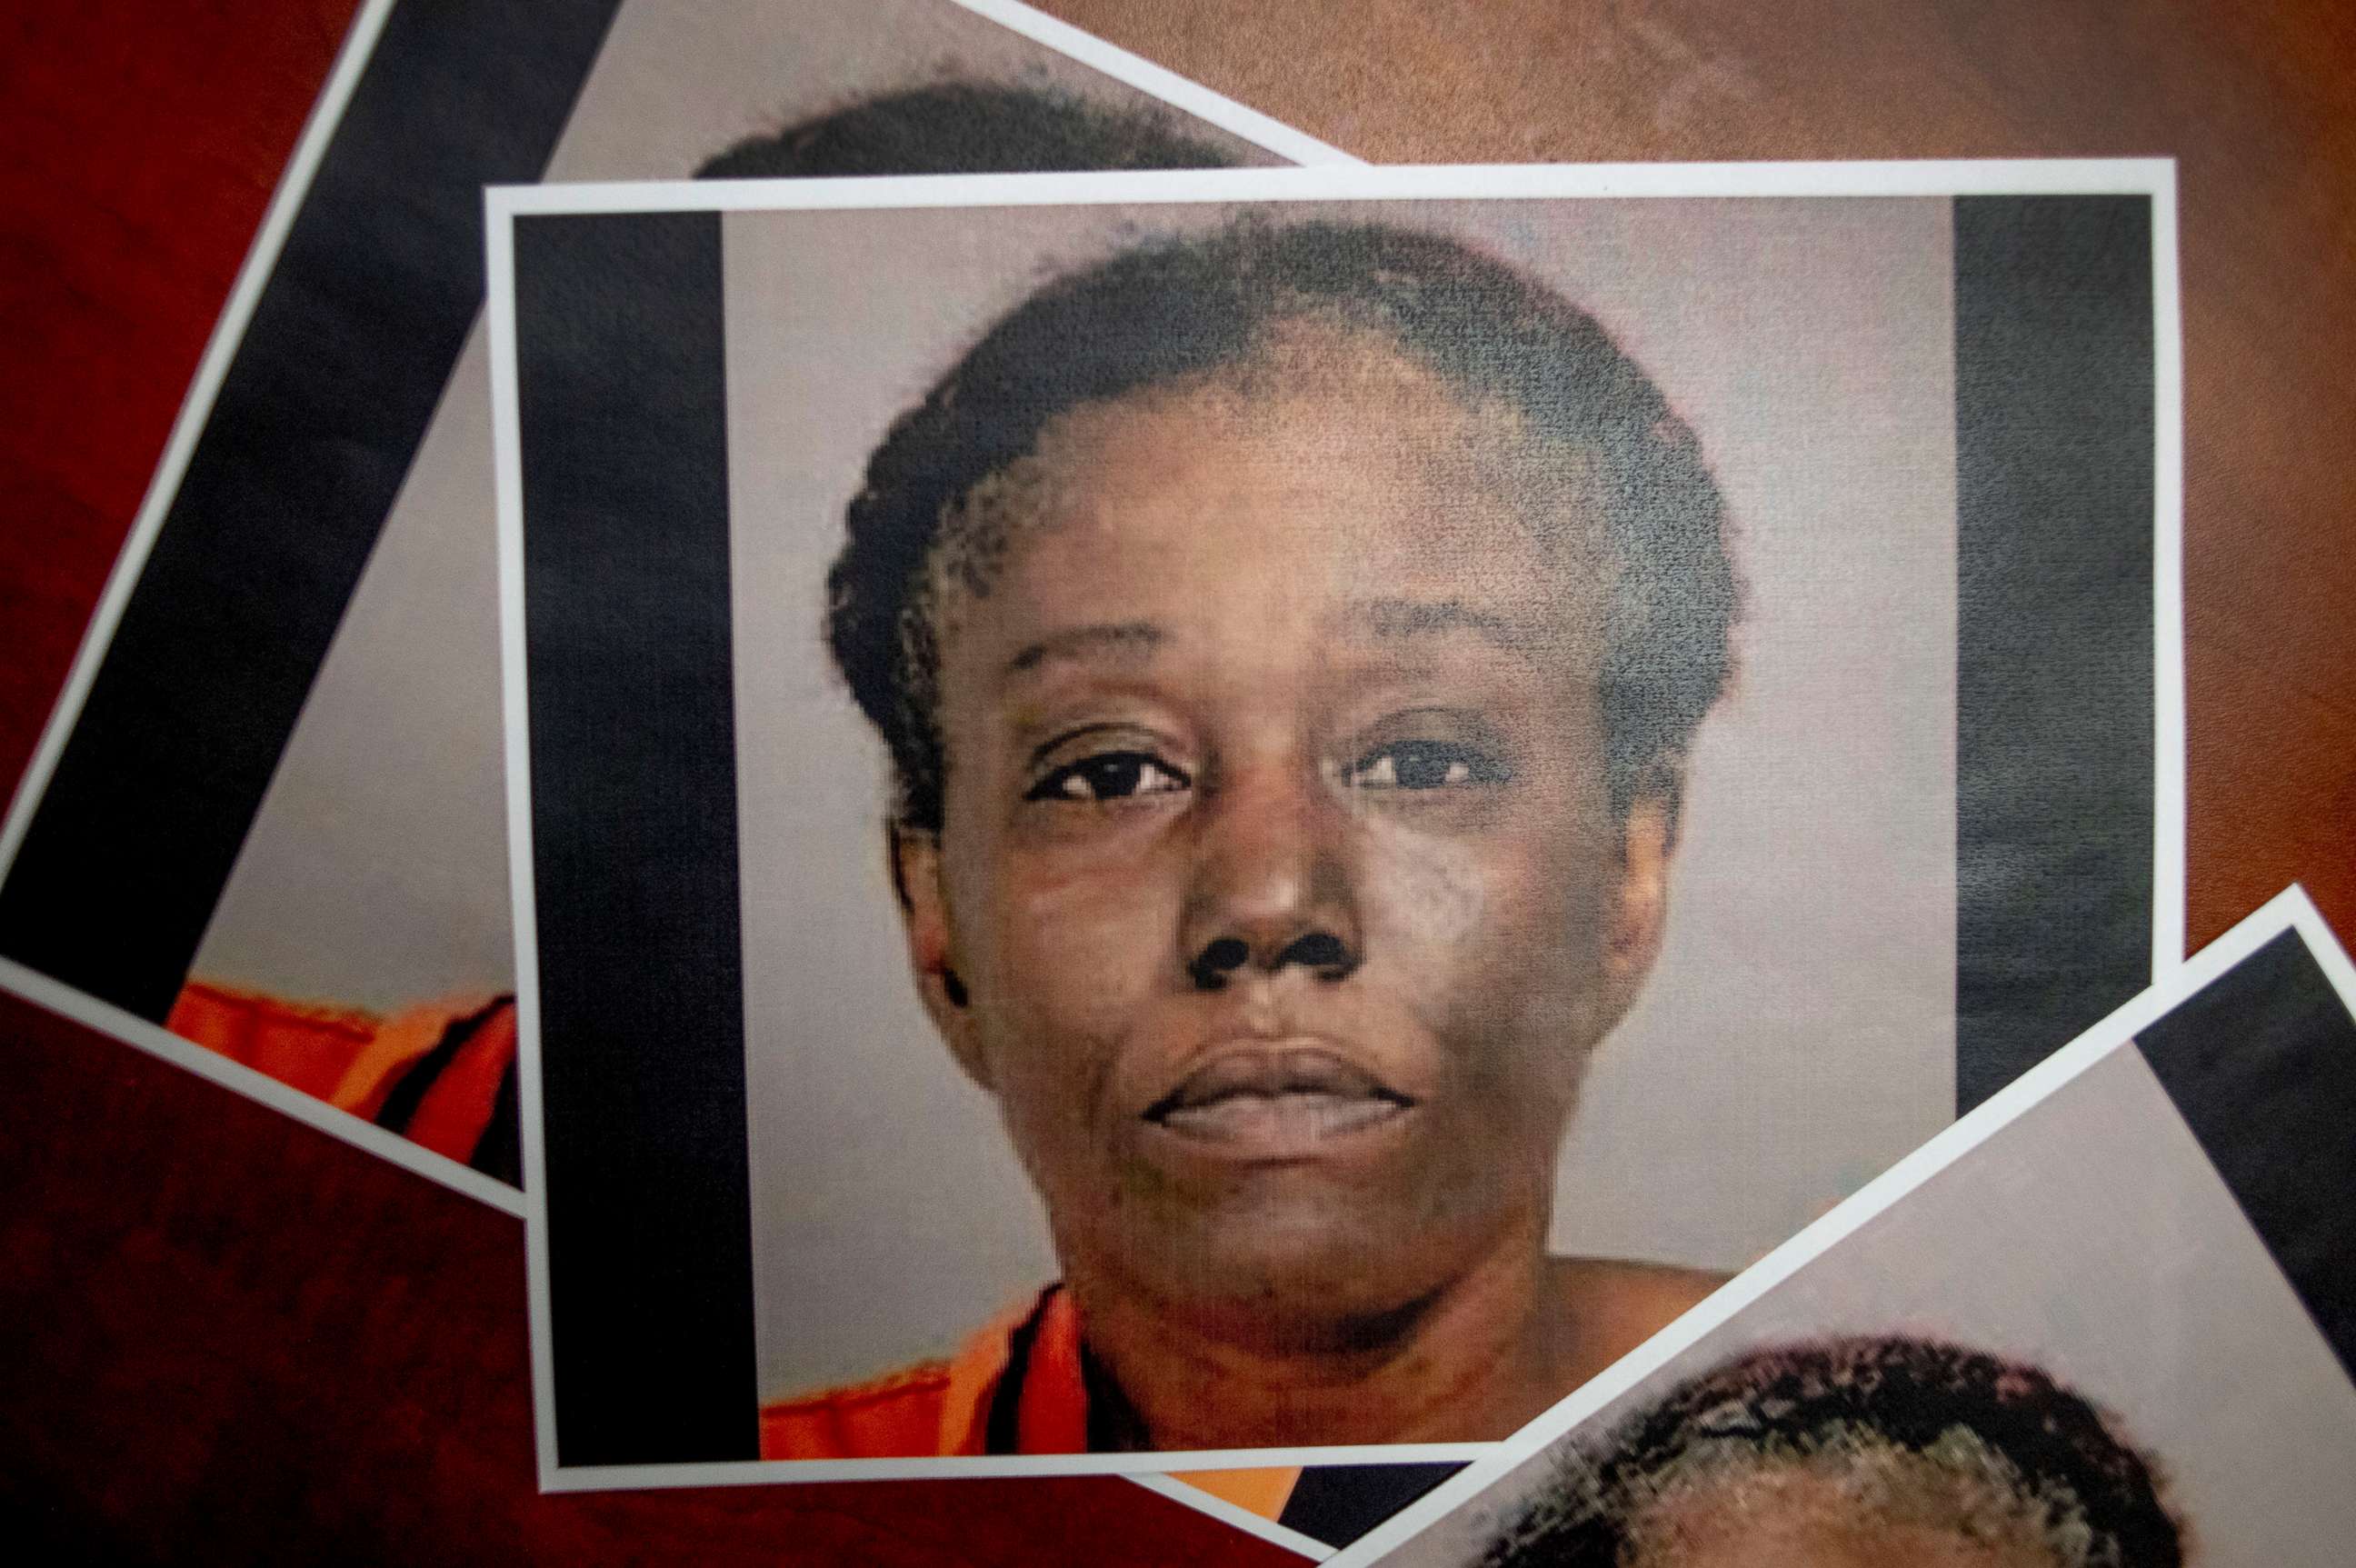 PHOTO: Sharmel L. Teague, 45, of Flint, was arraigned, on May 5, 2020, in 67th District Court on first-degree murder and felony firearm charges.